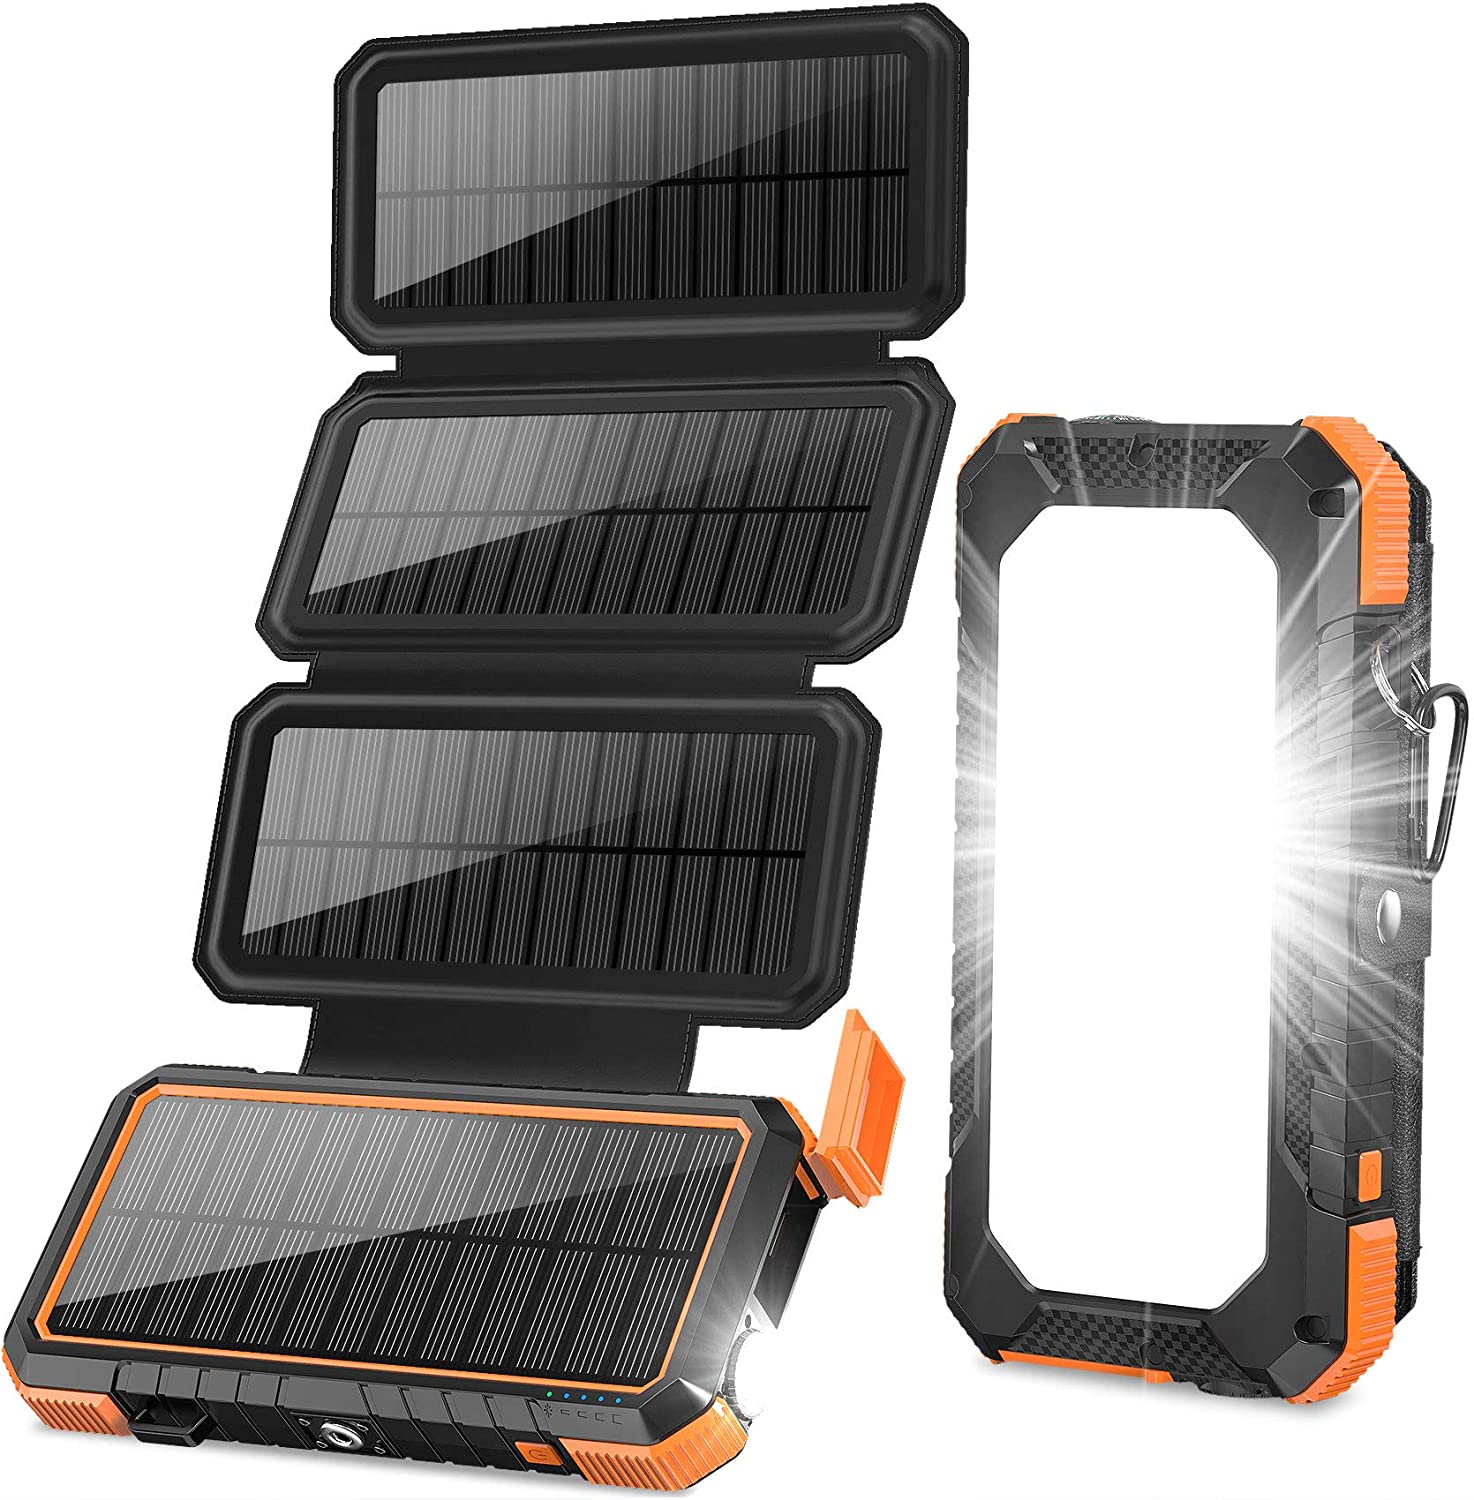 BLAVOR Solar Charger with Foldable Panels 18W Fast charging power bank